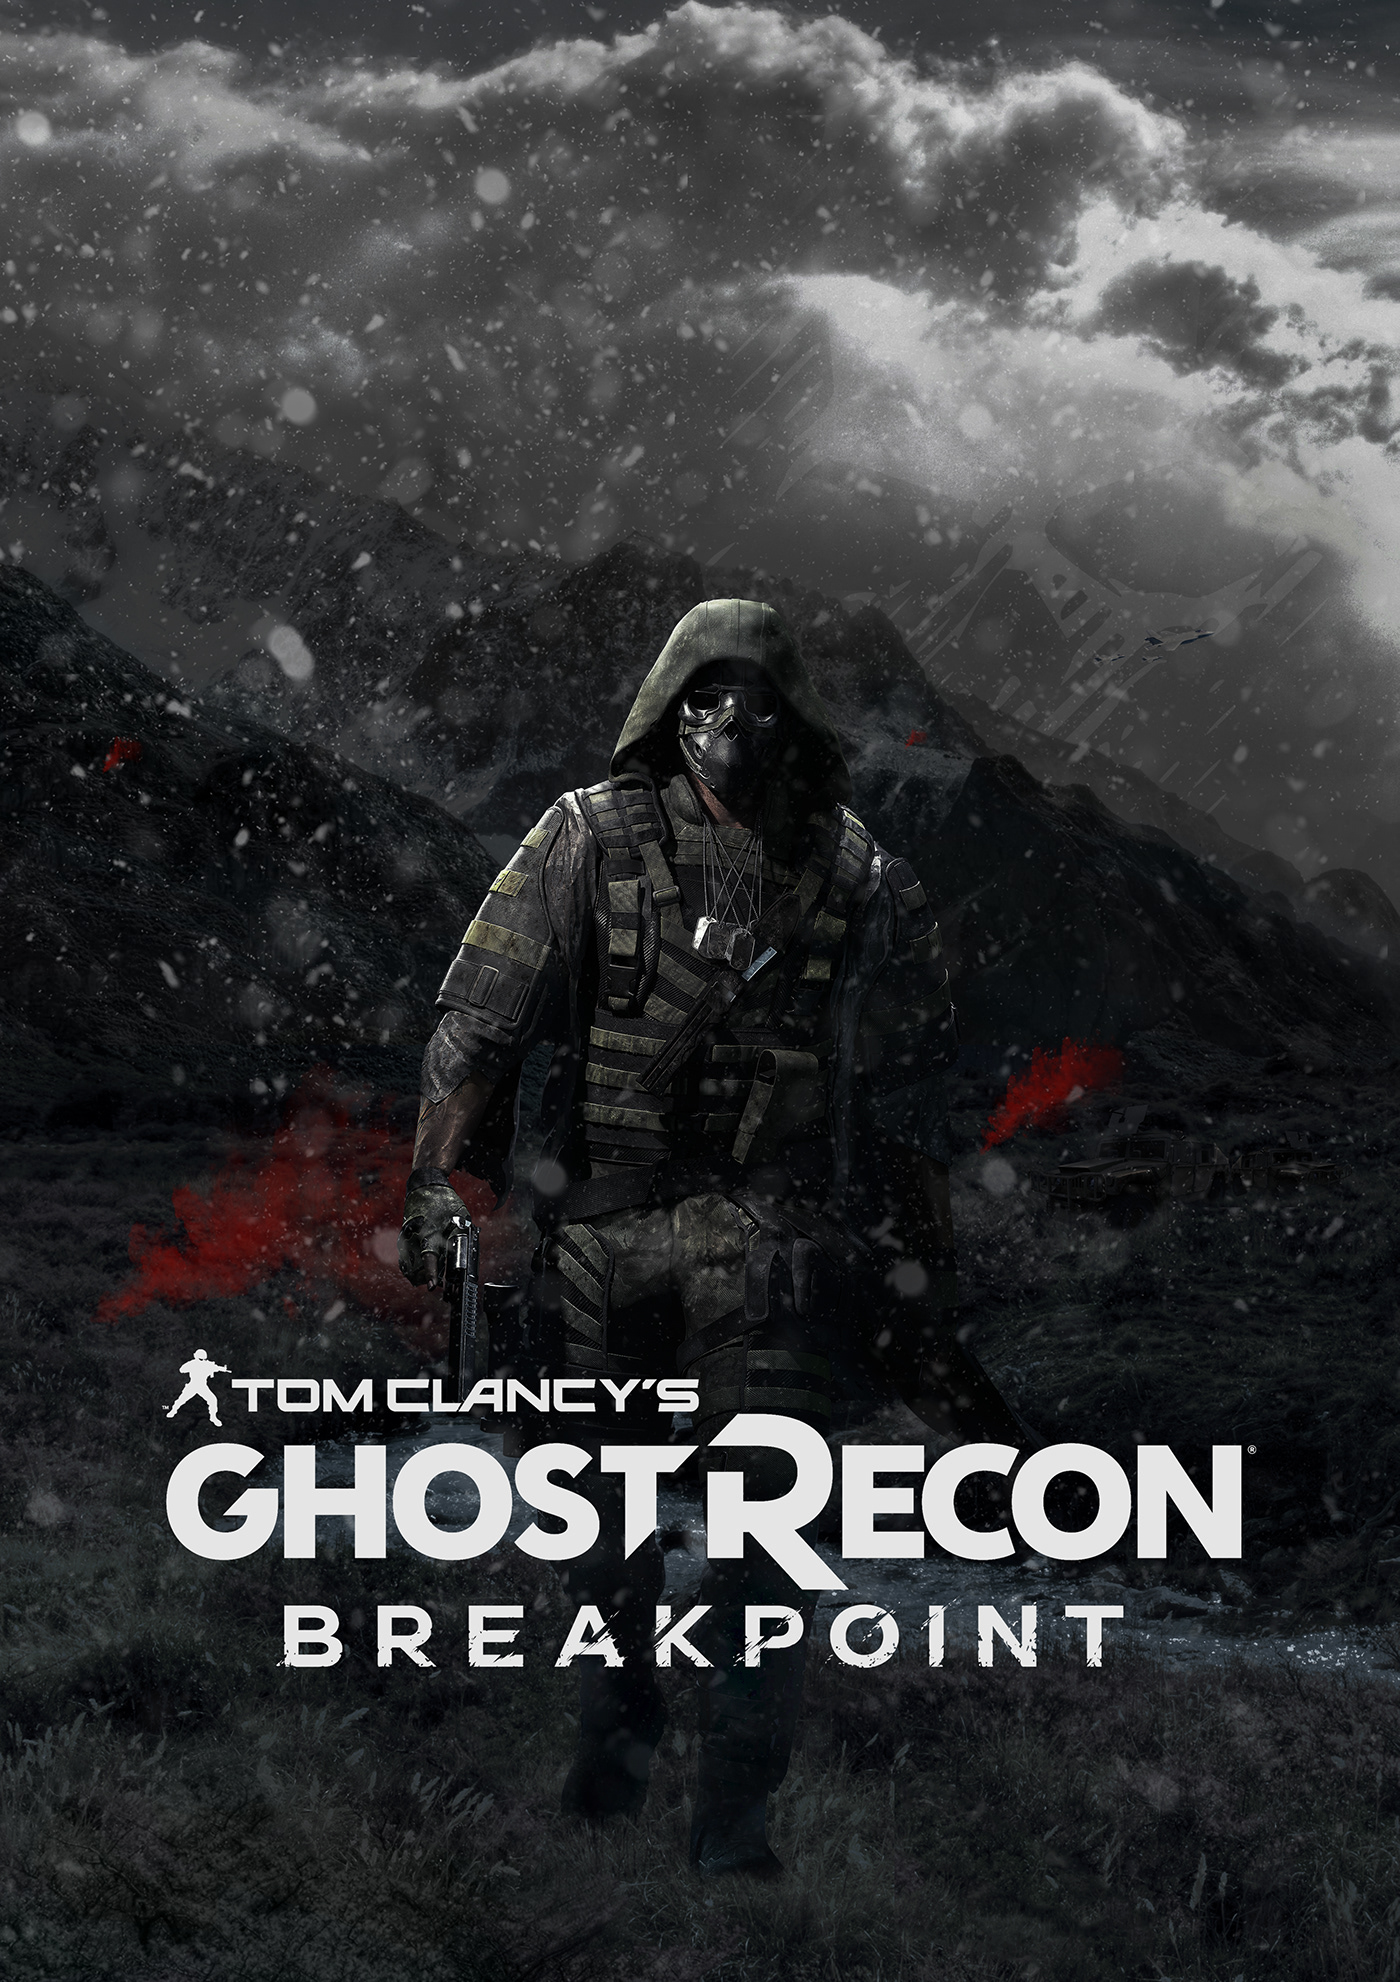 Tom clancy s breakpoint ключ. Tom Clancy's Ghost Recon: breakpoint. Игра ГОСТ Рекон брейкпоинт. PS Tom Clancy Ghost Recon breakpoint. Tom Clancy's Ghost Recon breakpoint ps4 PC.